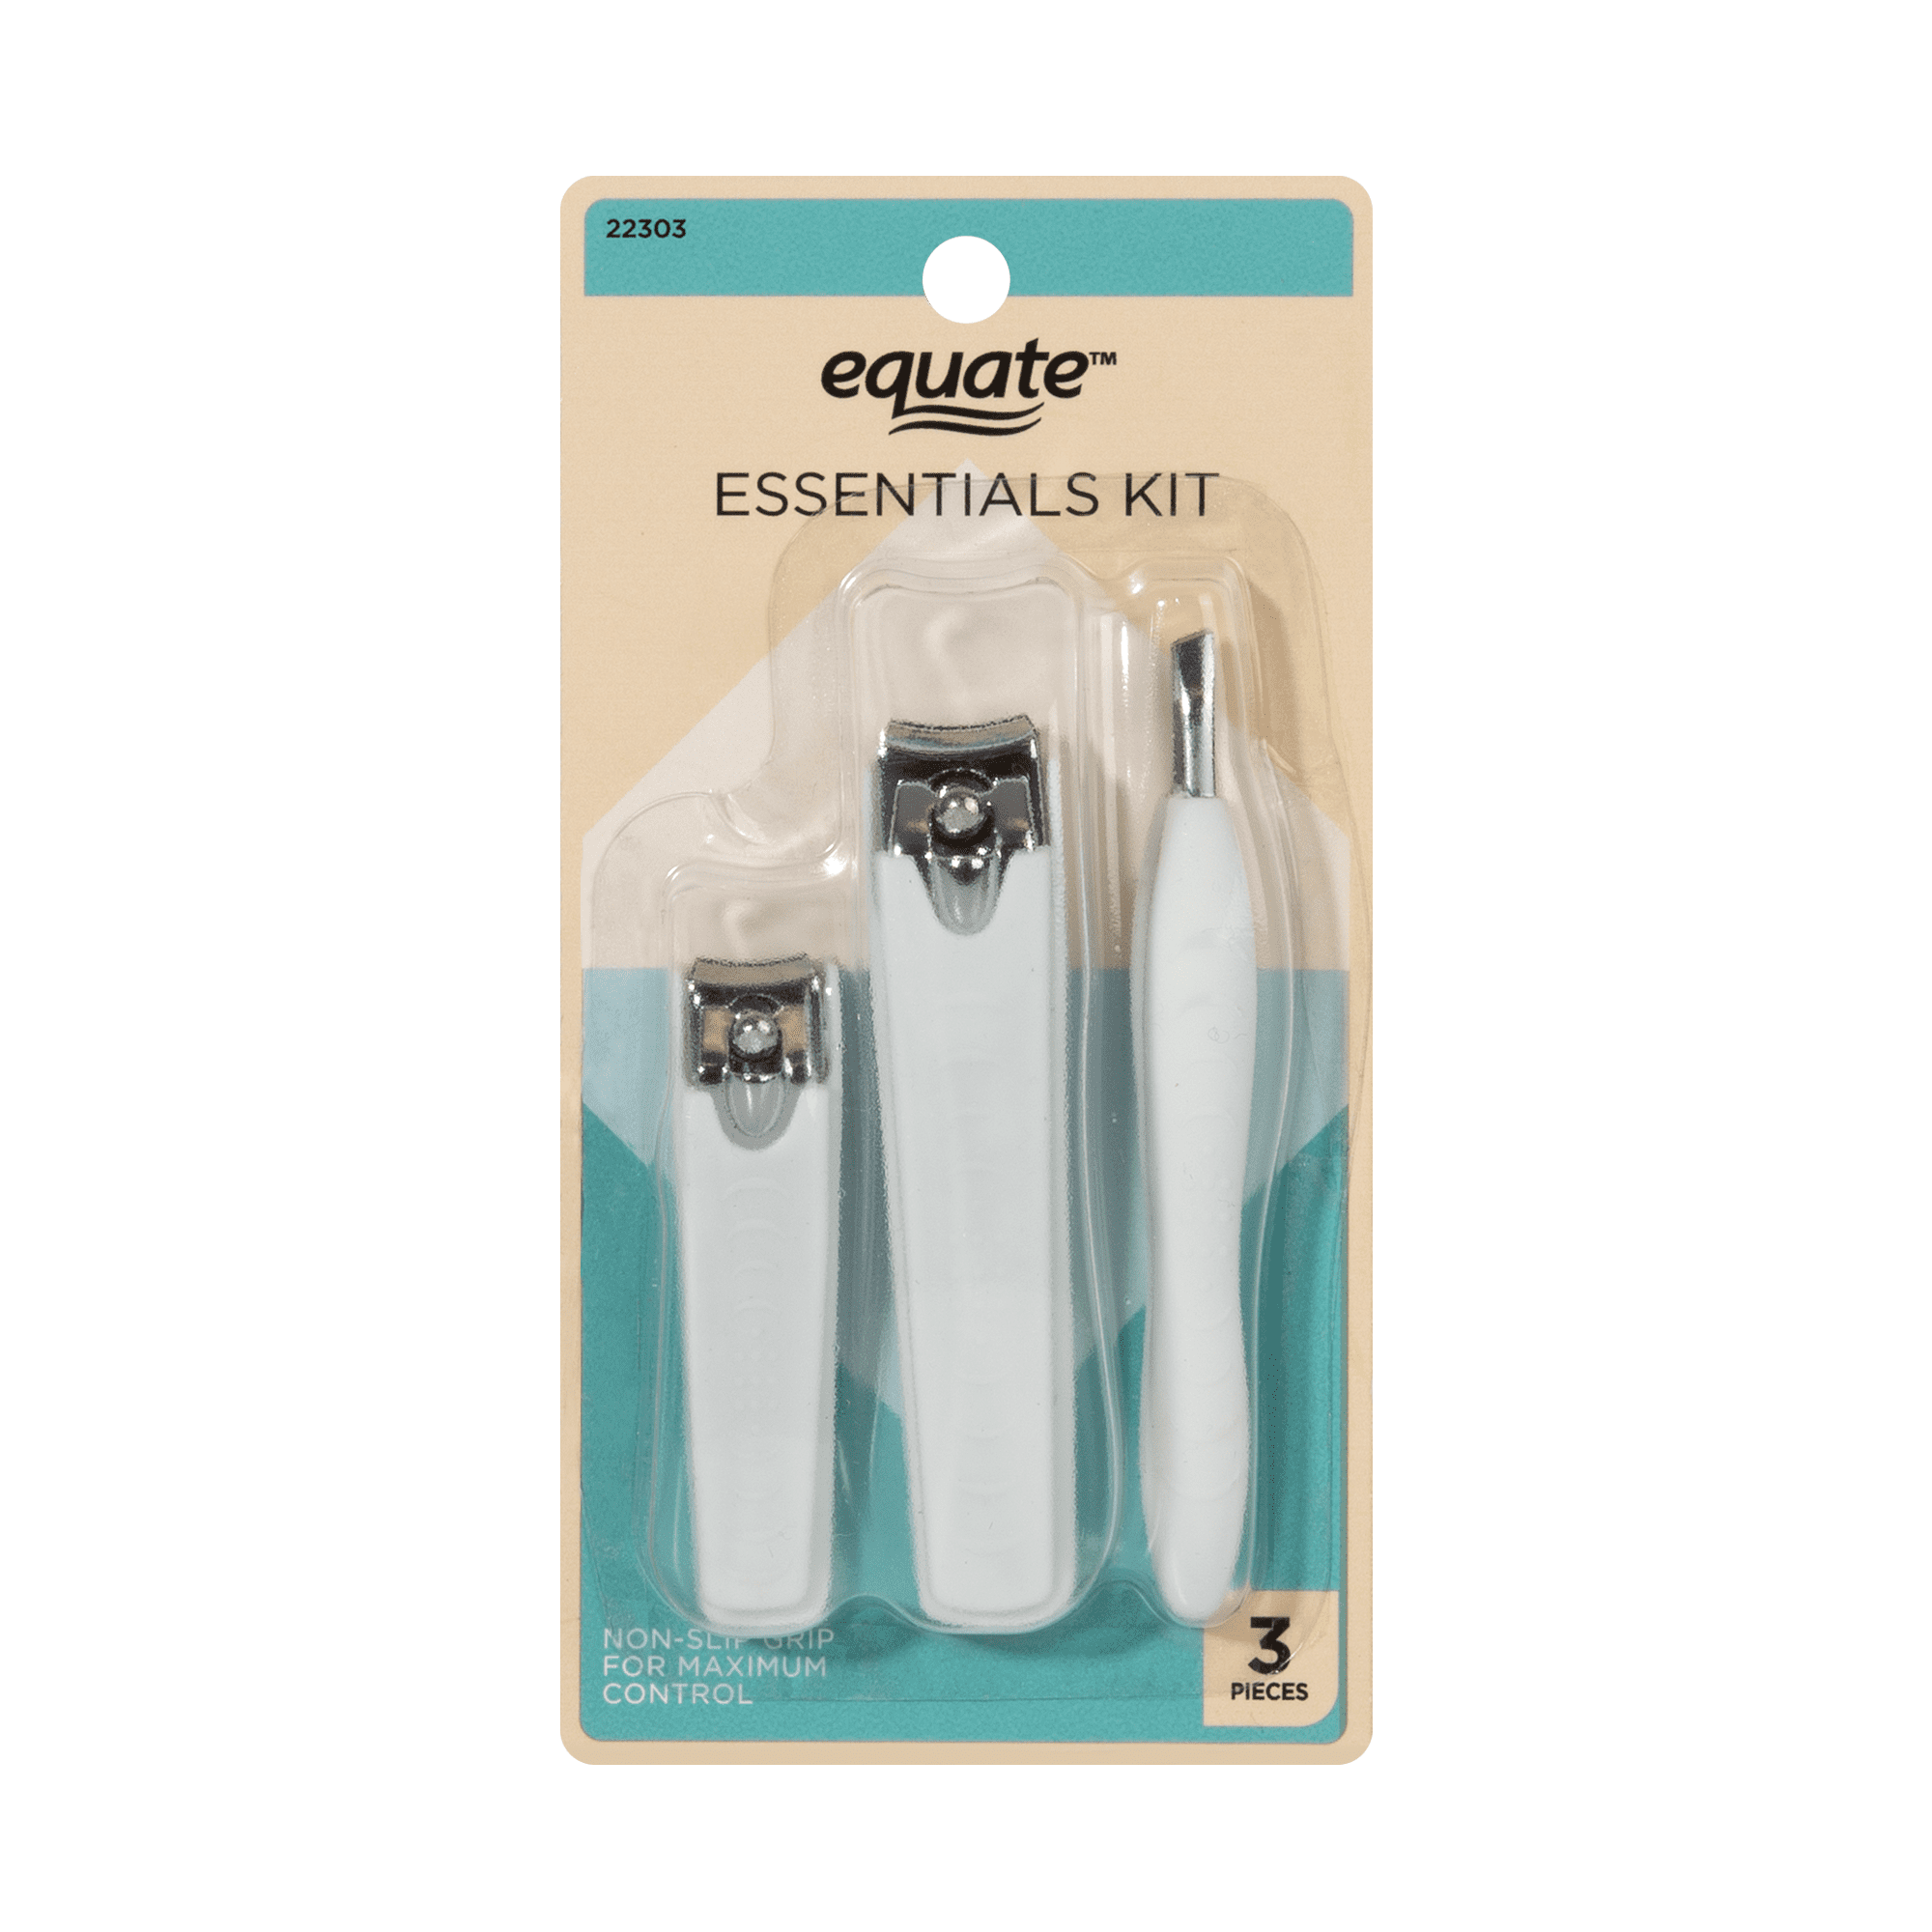 Equate Beauty Manicure Kit with Finger and Toenail Clippers, Tweezers